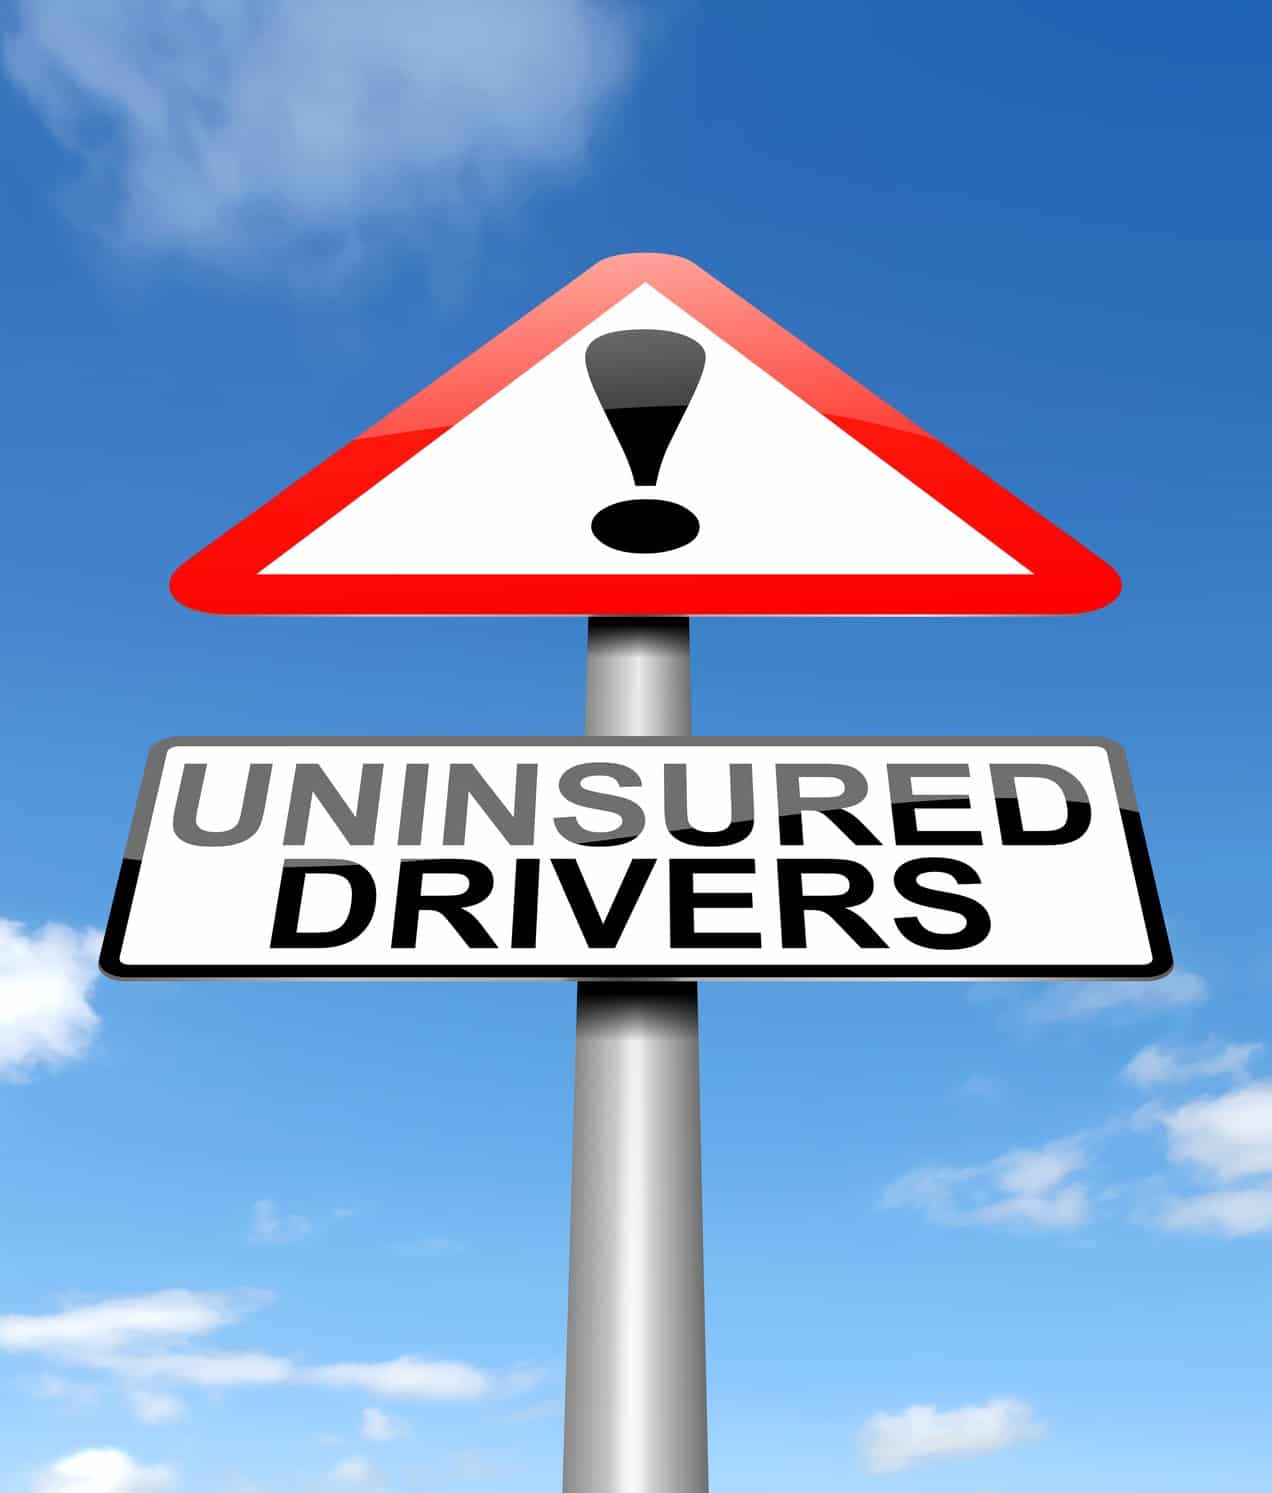 What Happens If You Get Hit By An Uninsured Driver In Texas?